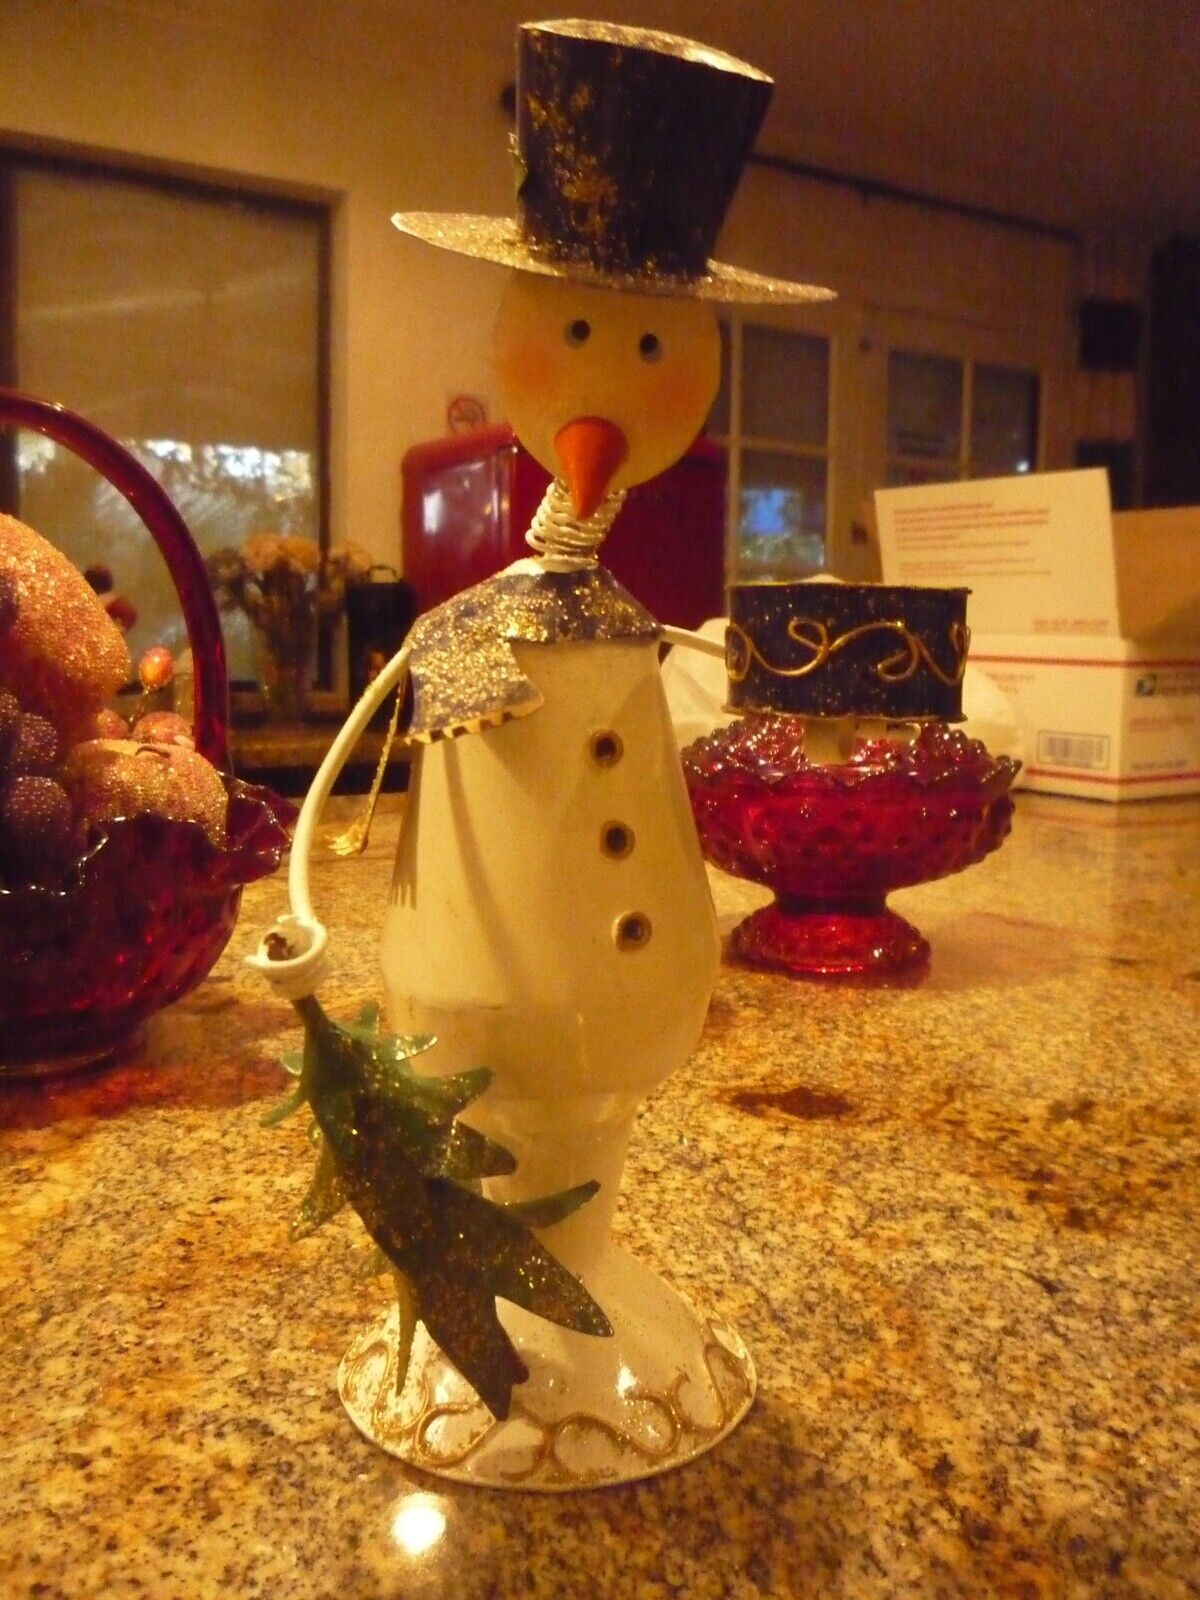 Celebrity owned vtg rare * CRAZY/GOOFY TABLETOP SNOWMAN w/ HAT & CARROT NOSE *